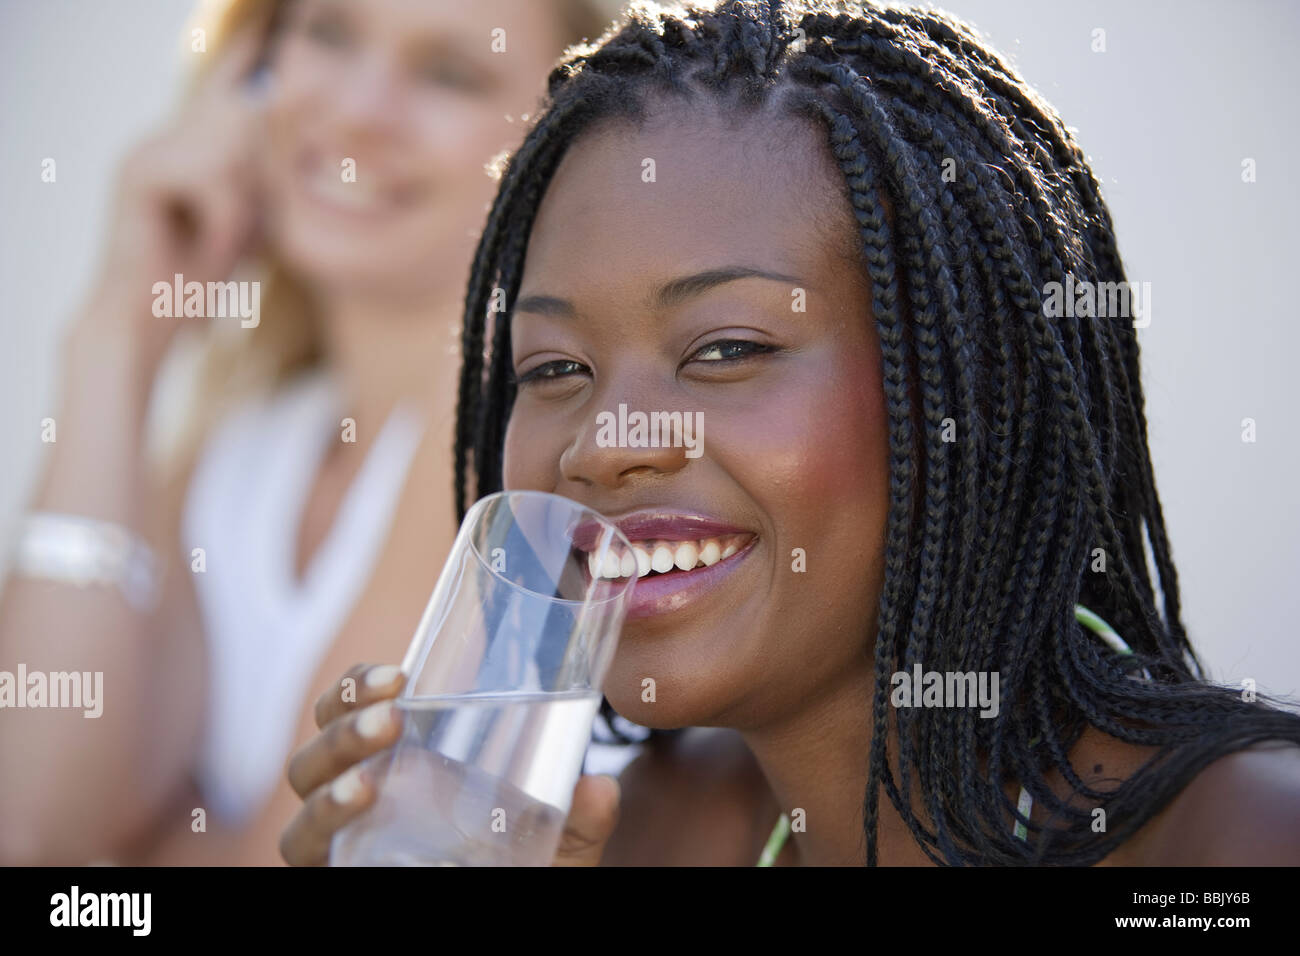 Portrait of a young african woman with waterglass outdoors smiling at the camera, a female friend in the background out of focus Stock Photo